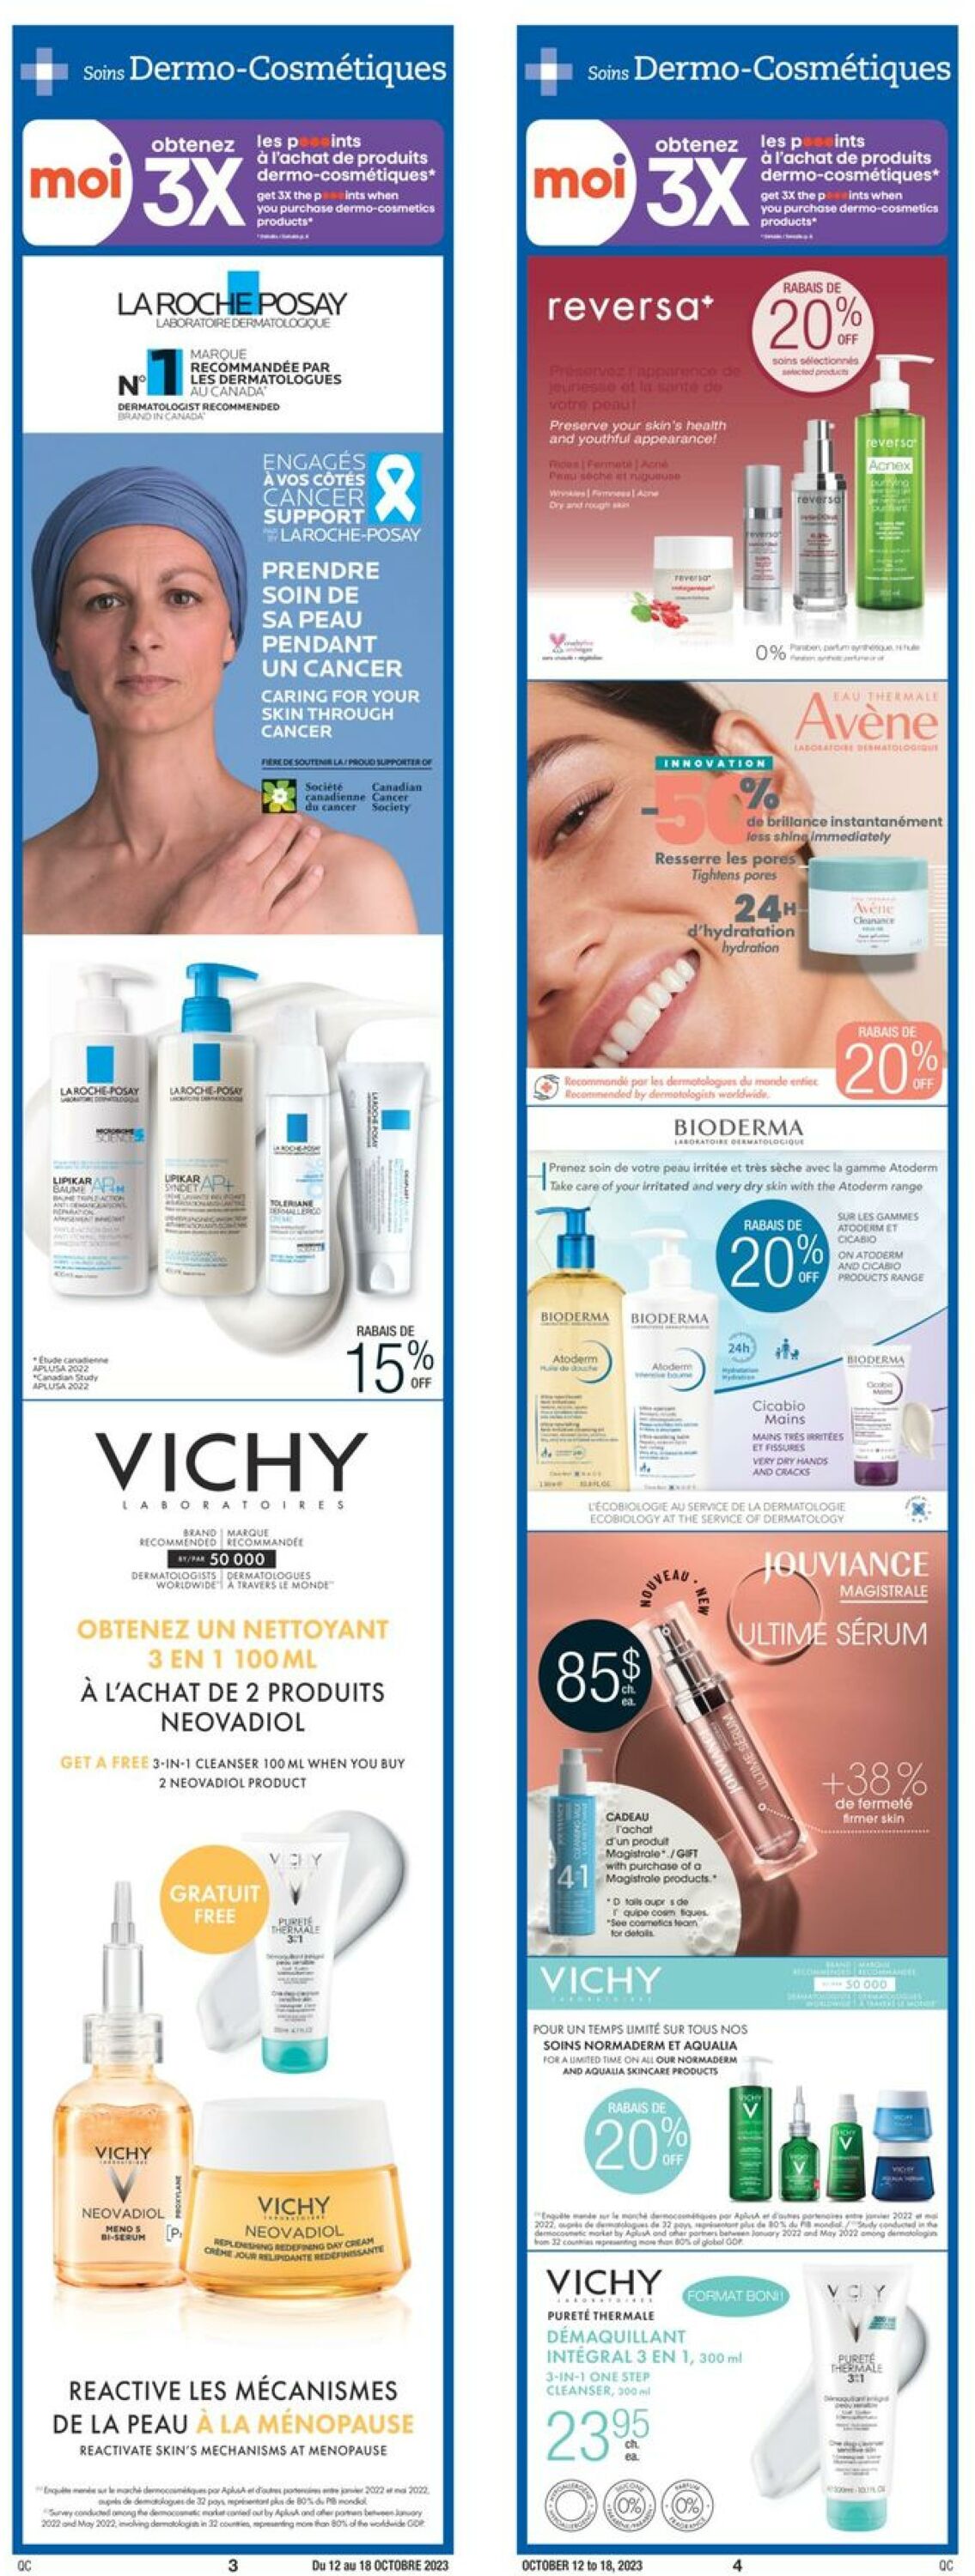 Jean Coutu Flyer from 10/12/2023